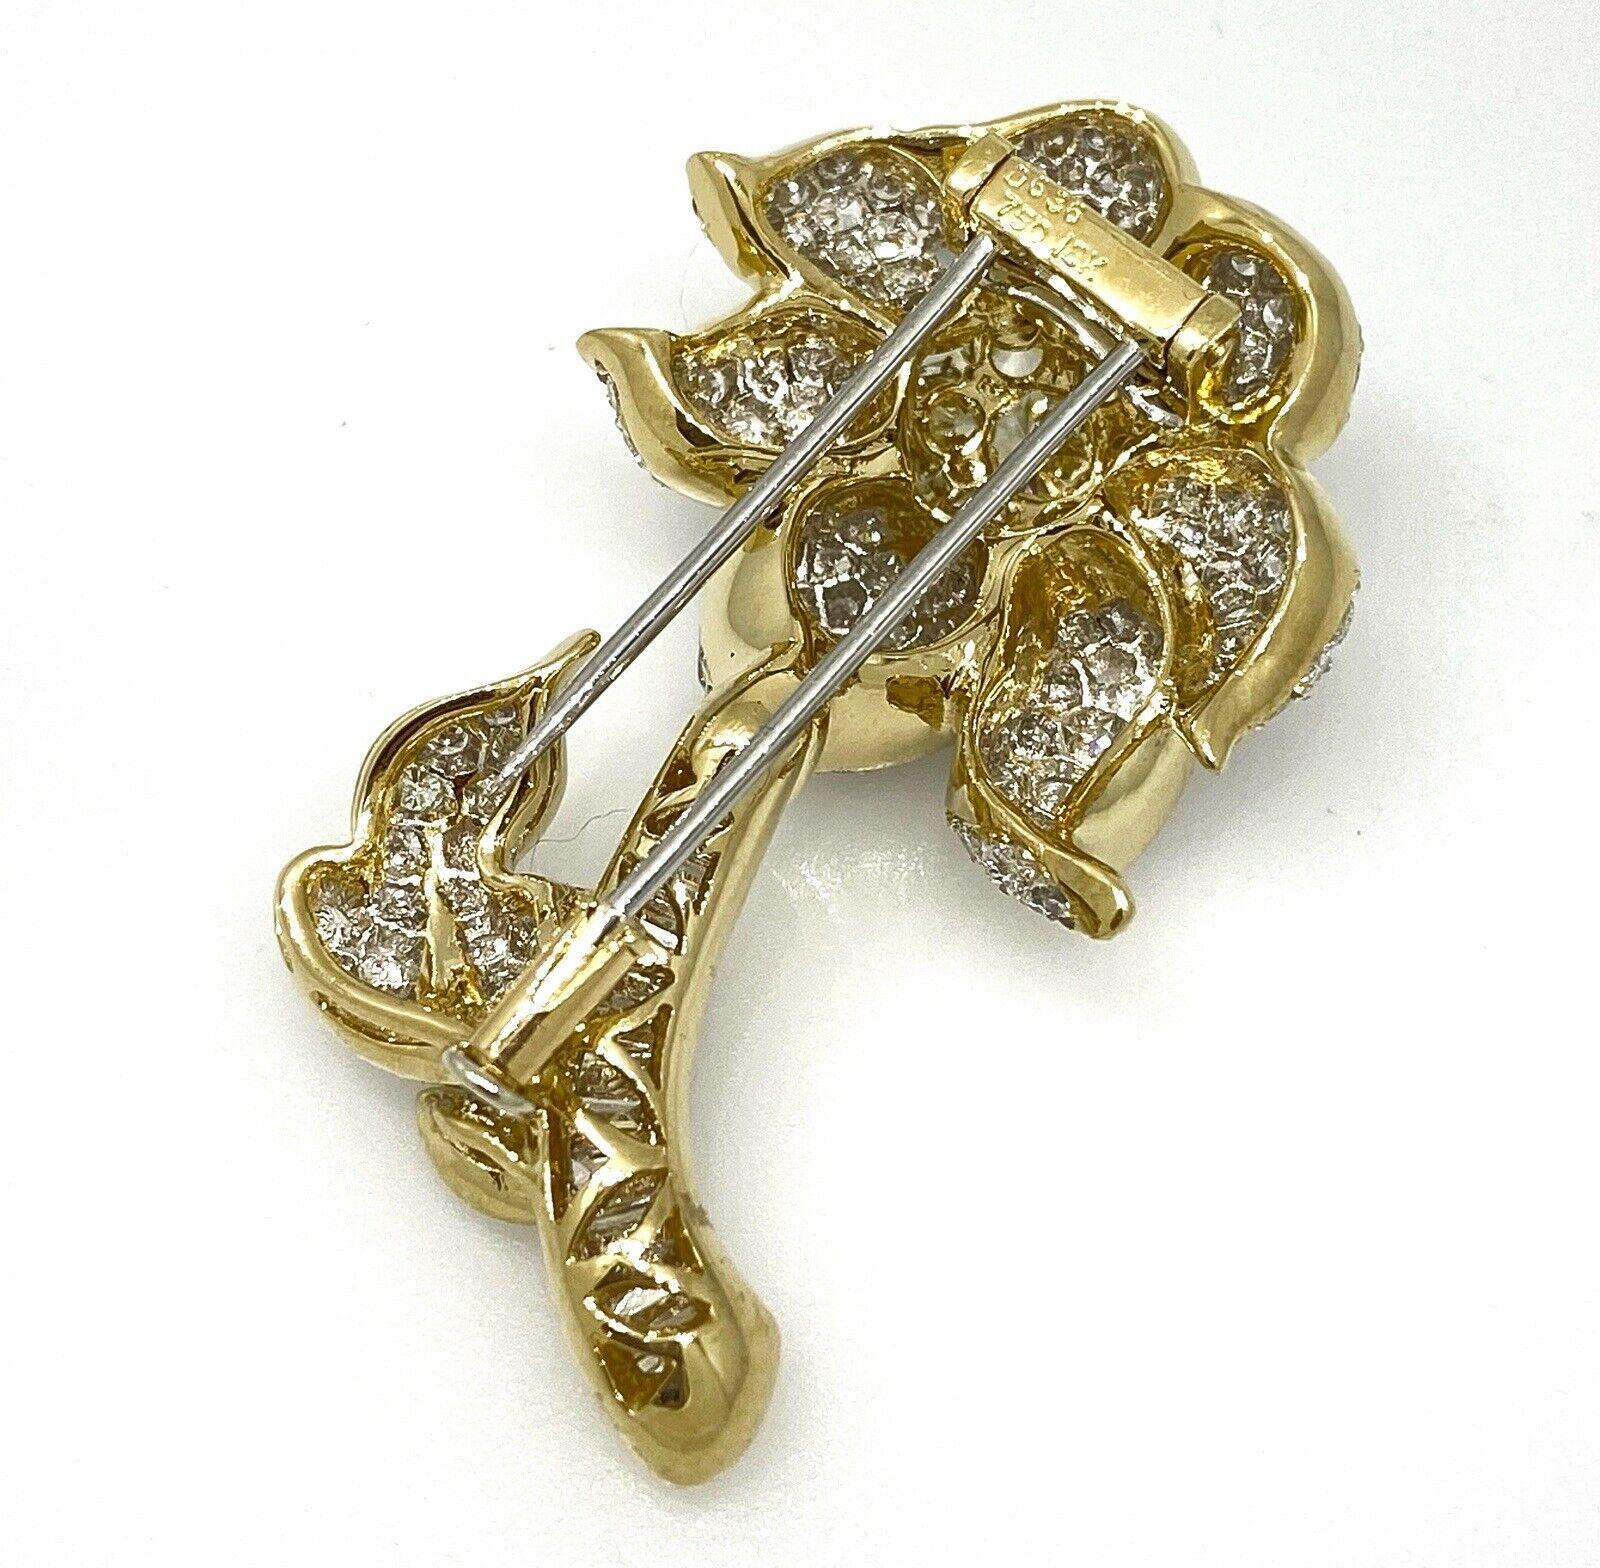 Estate Pave Diamond Flower Brooch / Pin in 18k Yellow Gold In Excellent Condition For Sale In La Jolla, CA